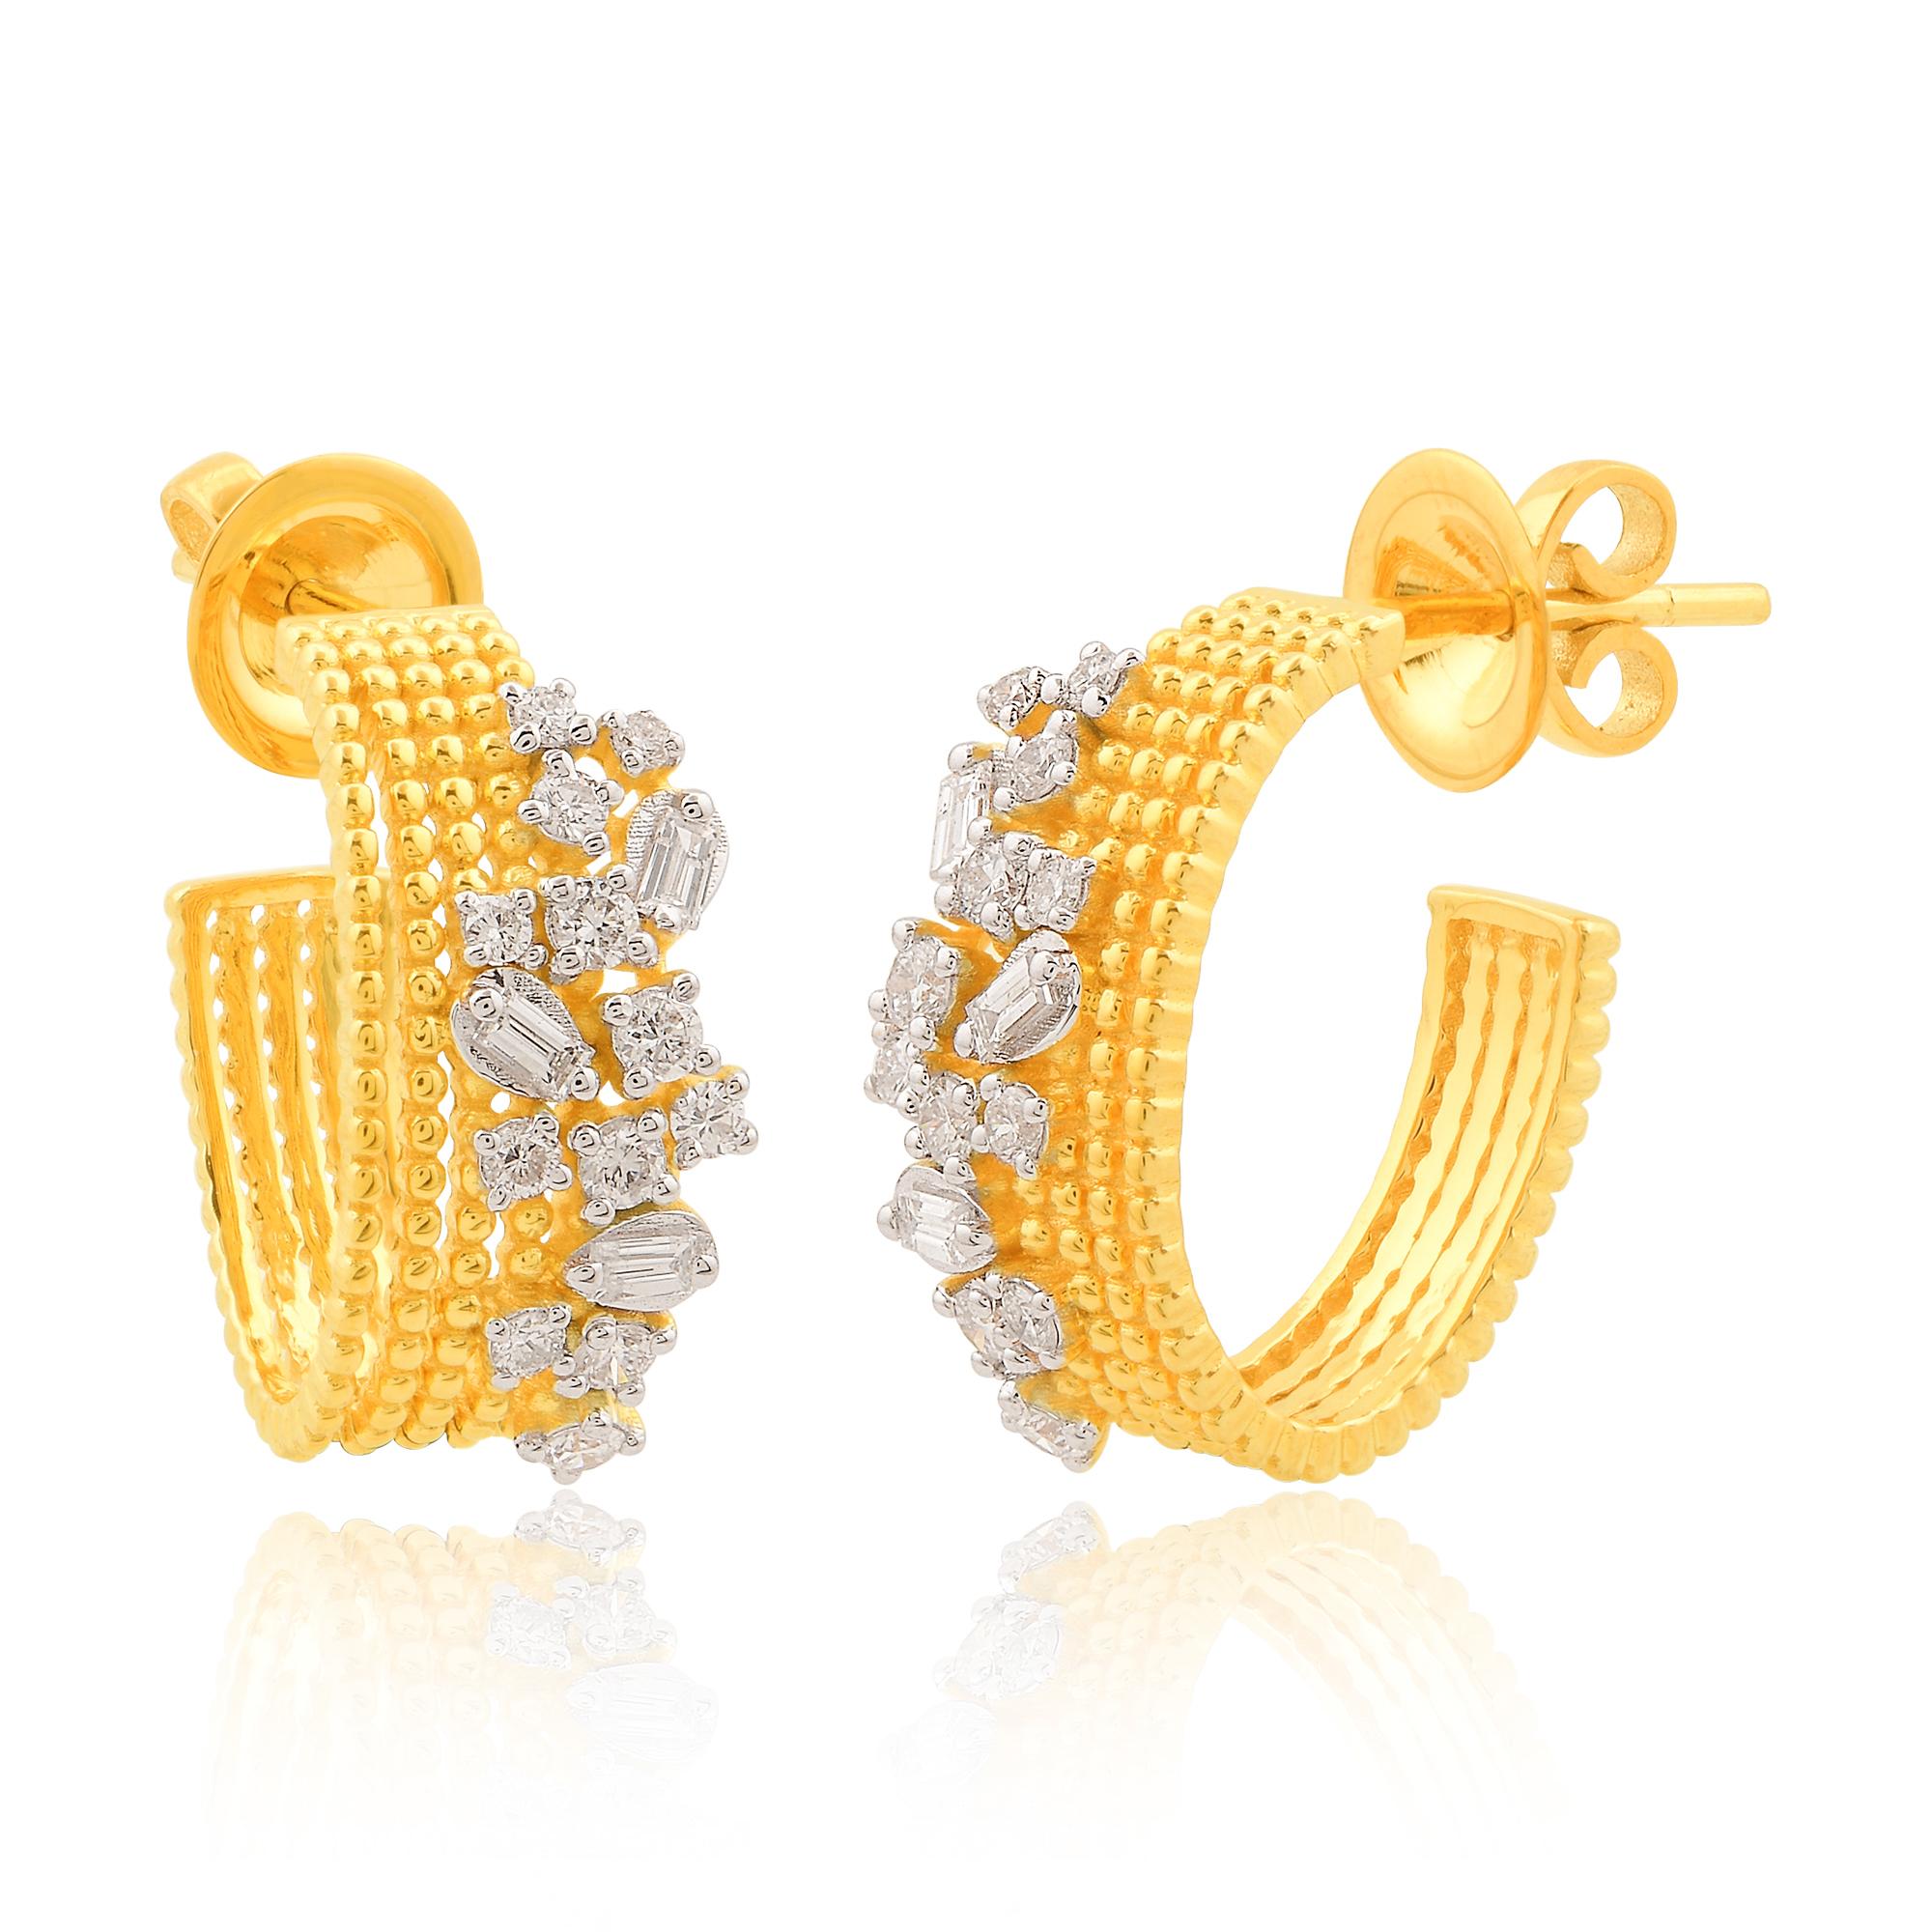 Item Code :- SEE-1117B
Gross Weight :- 6.54 gm
18k Solid Yellow Gold Weight :- 6.41 gm
Natural Diamond Weight :- 0.65 carat  ( AVERAGE DIAMOND CLARITY SI1-SI2 & COLOR H-I )
Earrings Size :- 8 x 19 mm approx.

✦ Sizing
.....................
We can